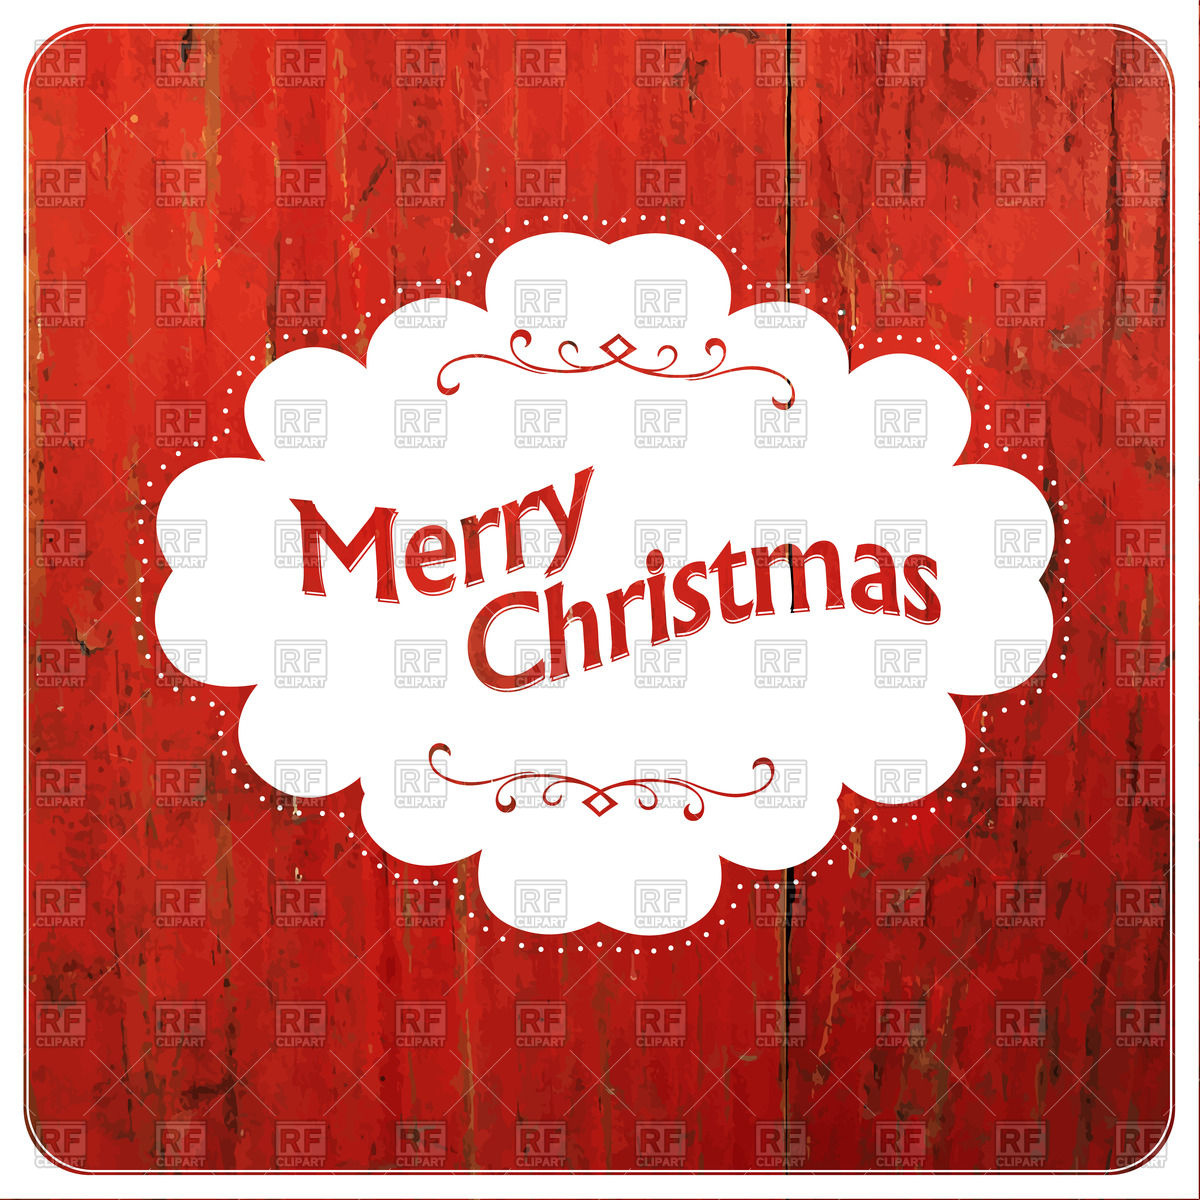 Merry Christmas Wite Label On Red Planks Download Royalty Free Vector